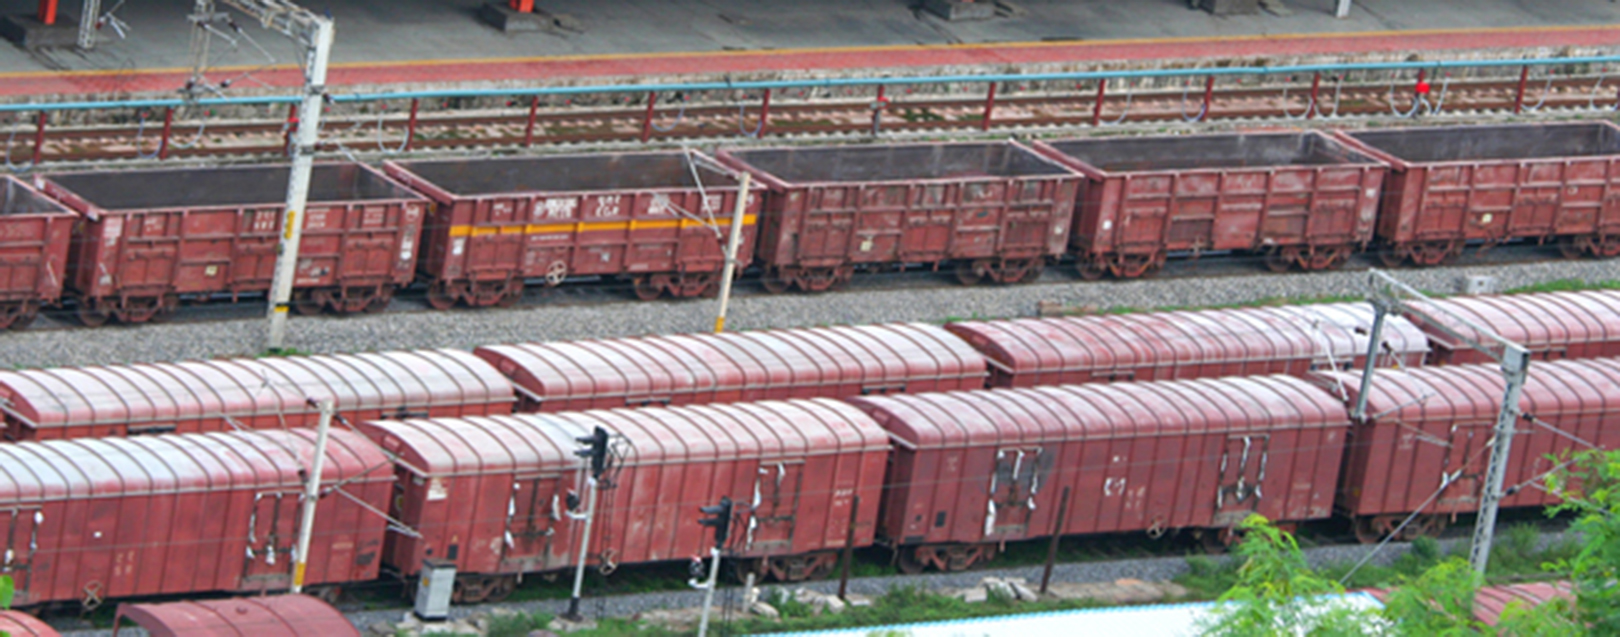 Indian Railways freight traffic increases to 532.4 million tonnes in H1 FY2014-15